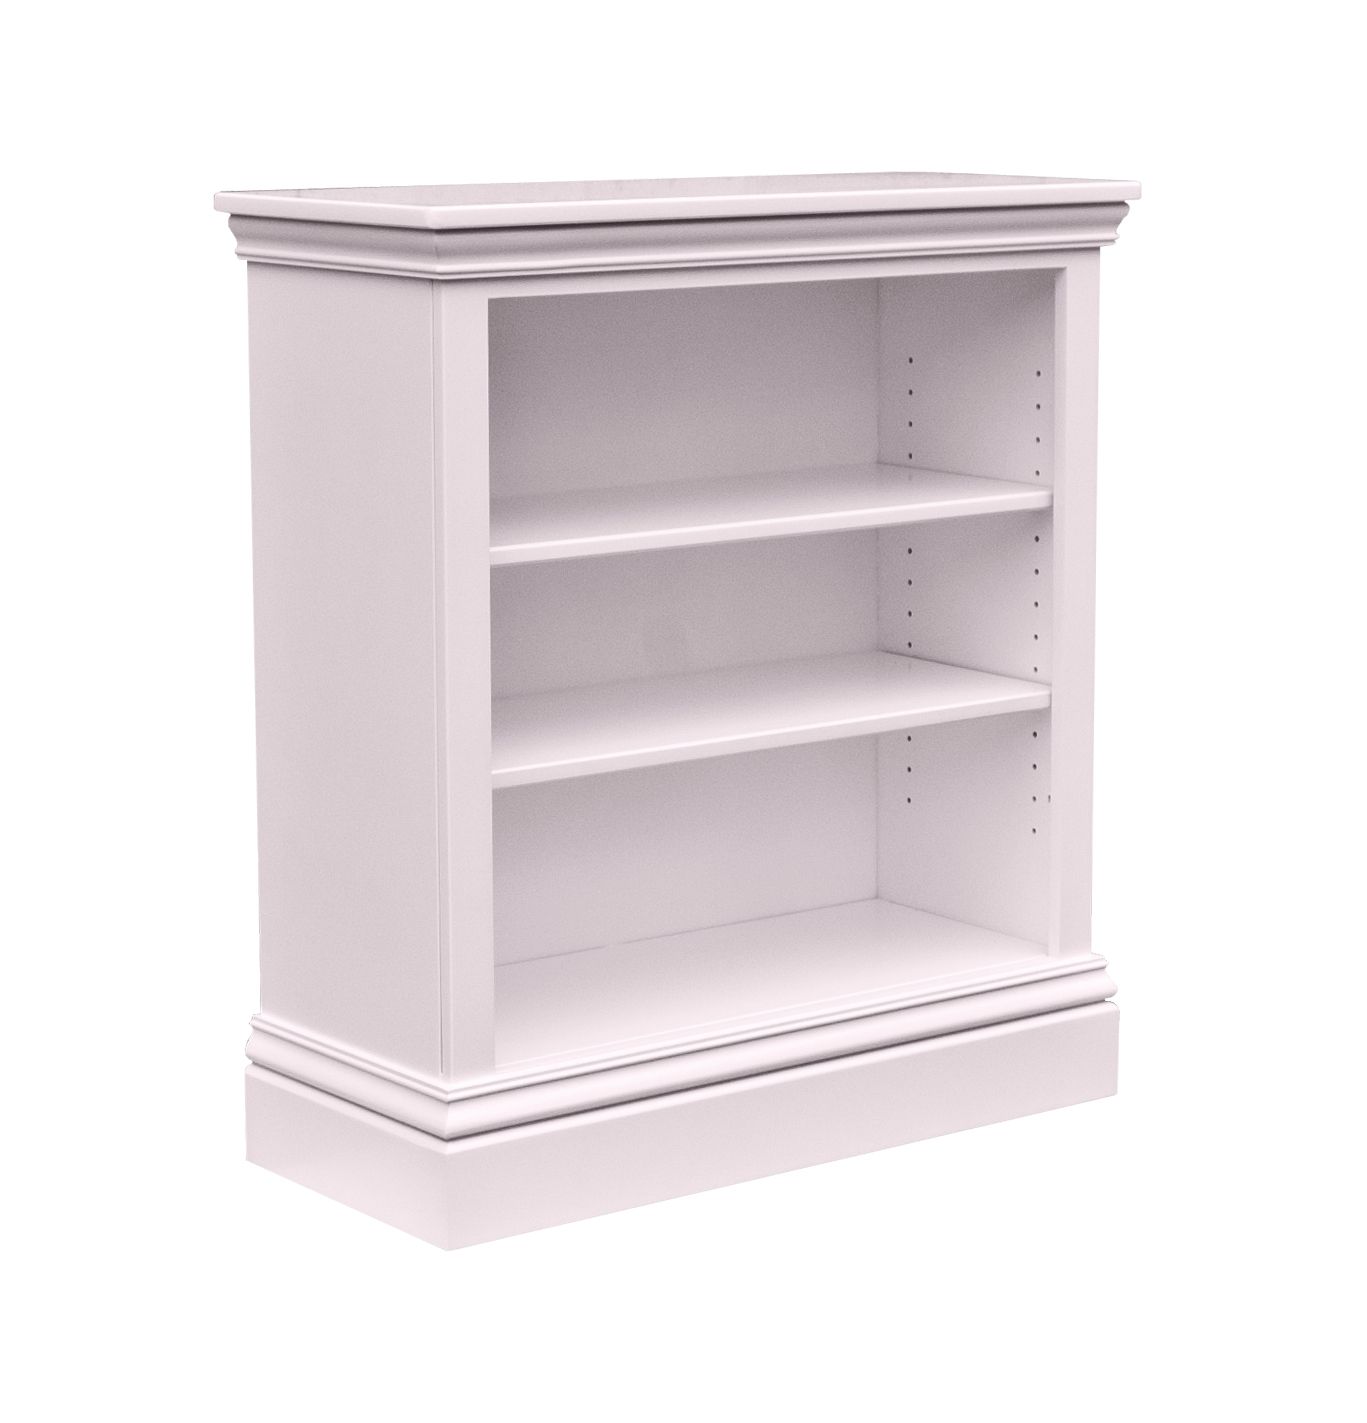 New Hampton Small Bookcase - Candy Floss